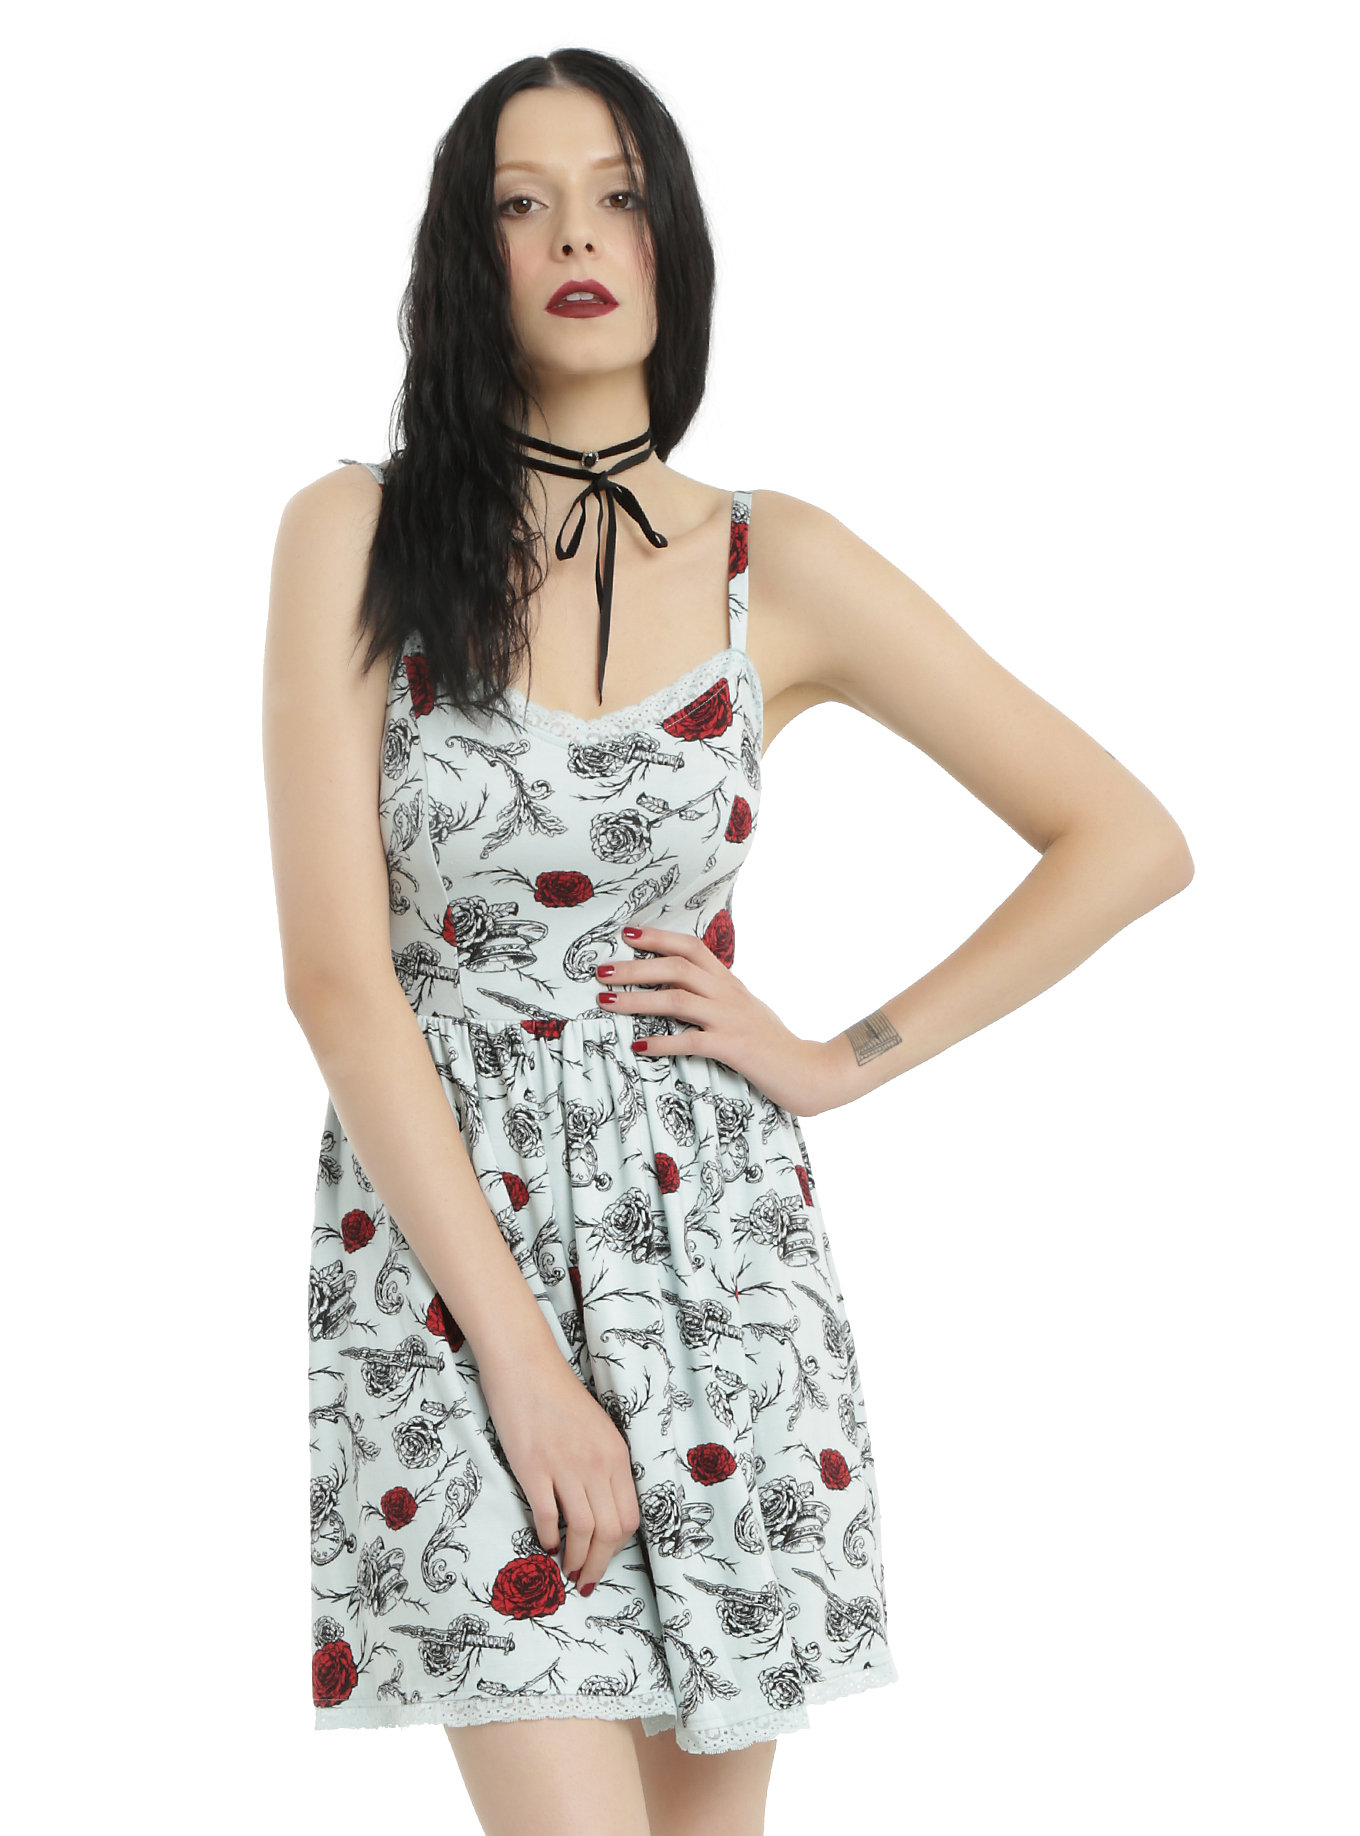 New Once Upon A Time Fashion Collection Online Now at Hot Topic ...